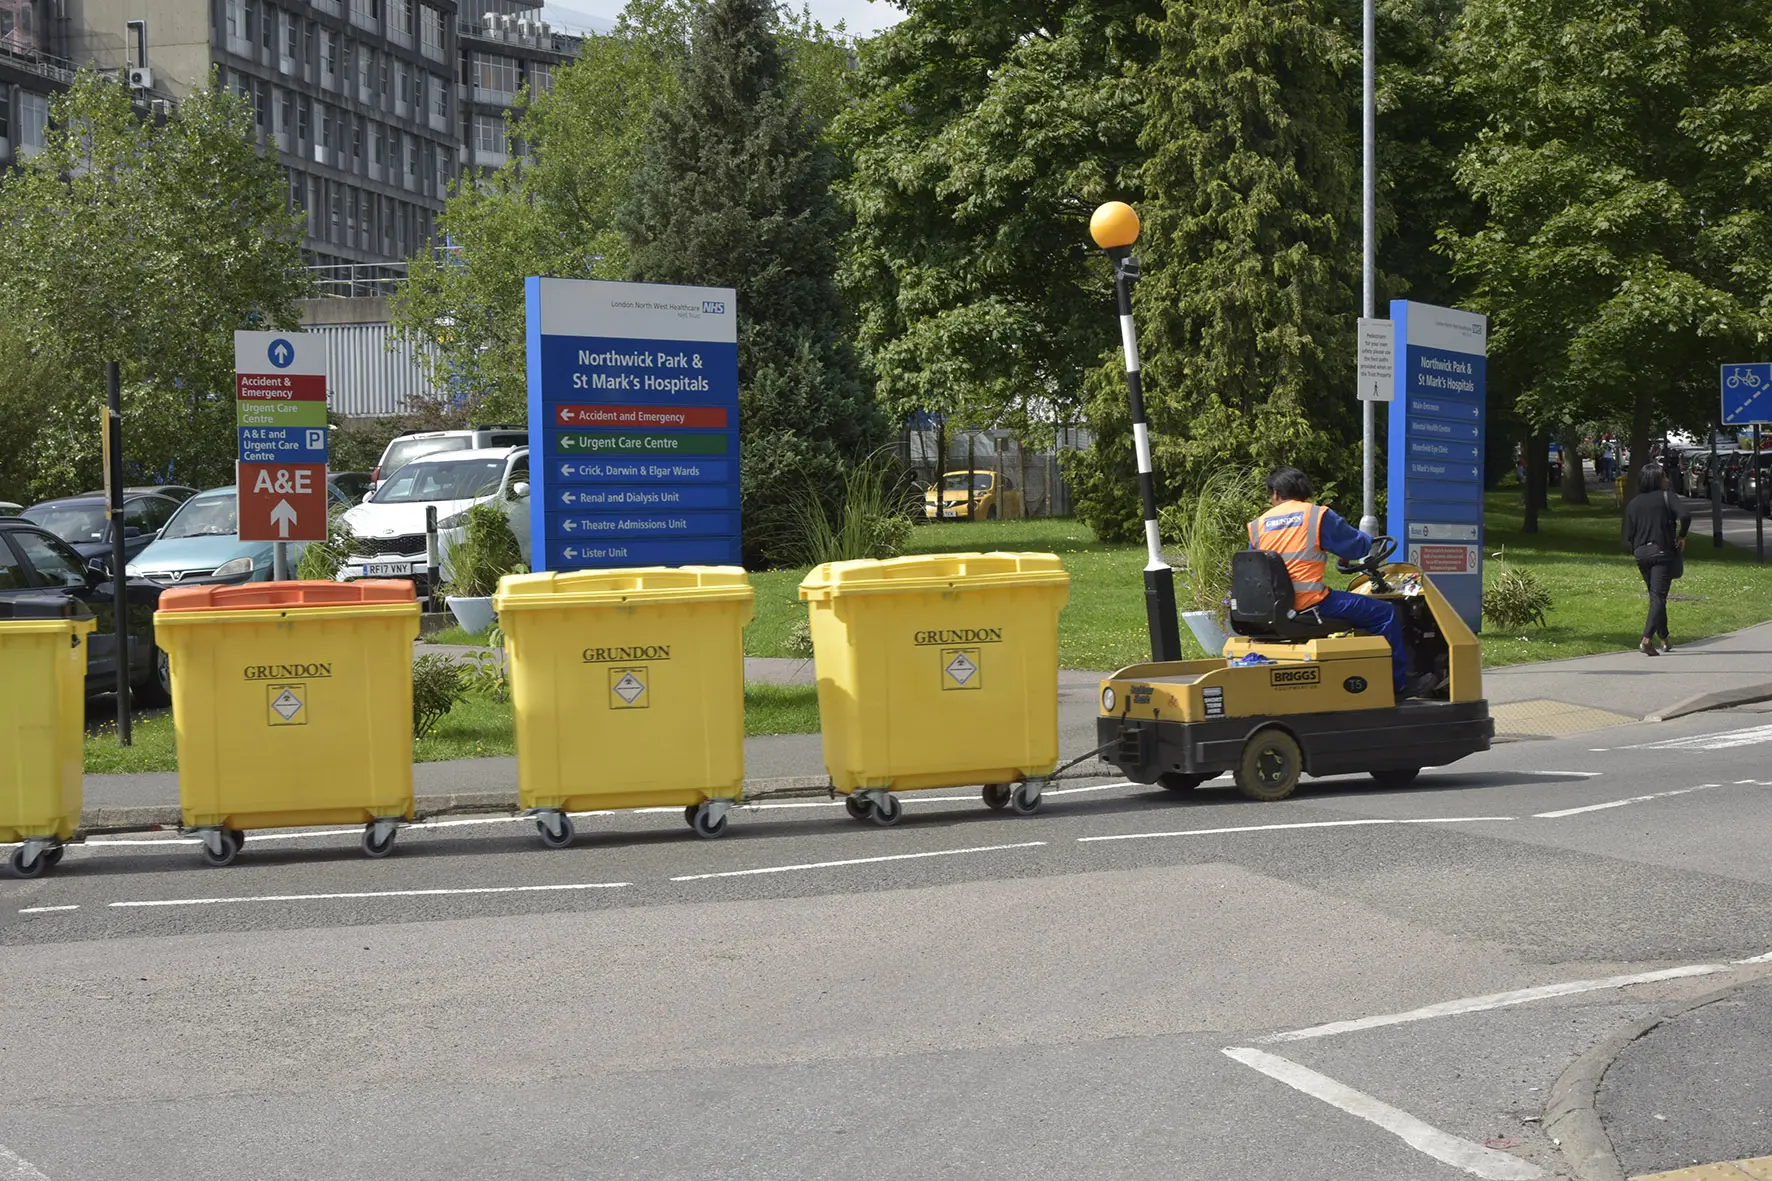 As part of the contract, Grundon introduced an on-site waste manager and three dedicated waste team leaders to London North West University Health (LNWH) NHS Trust